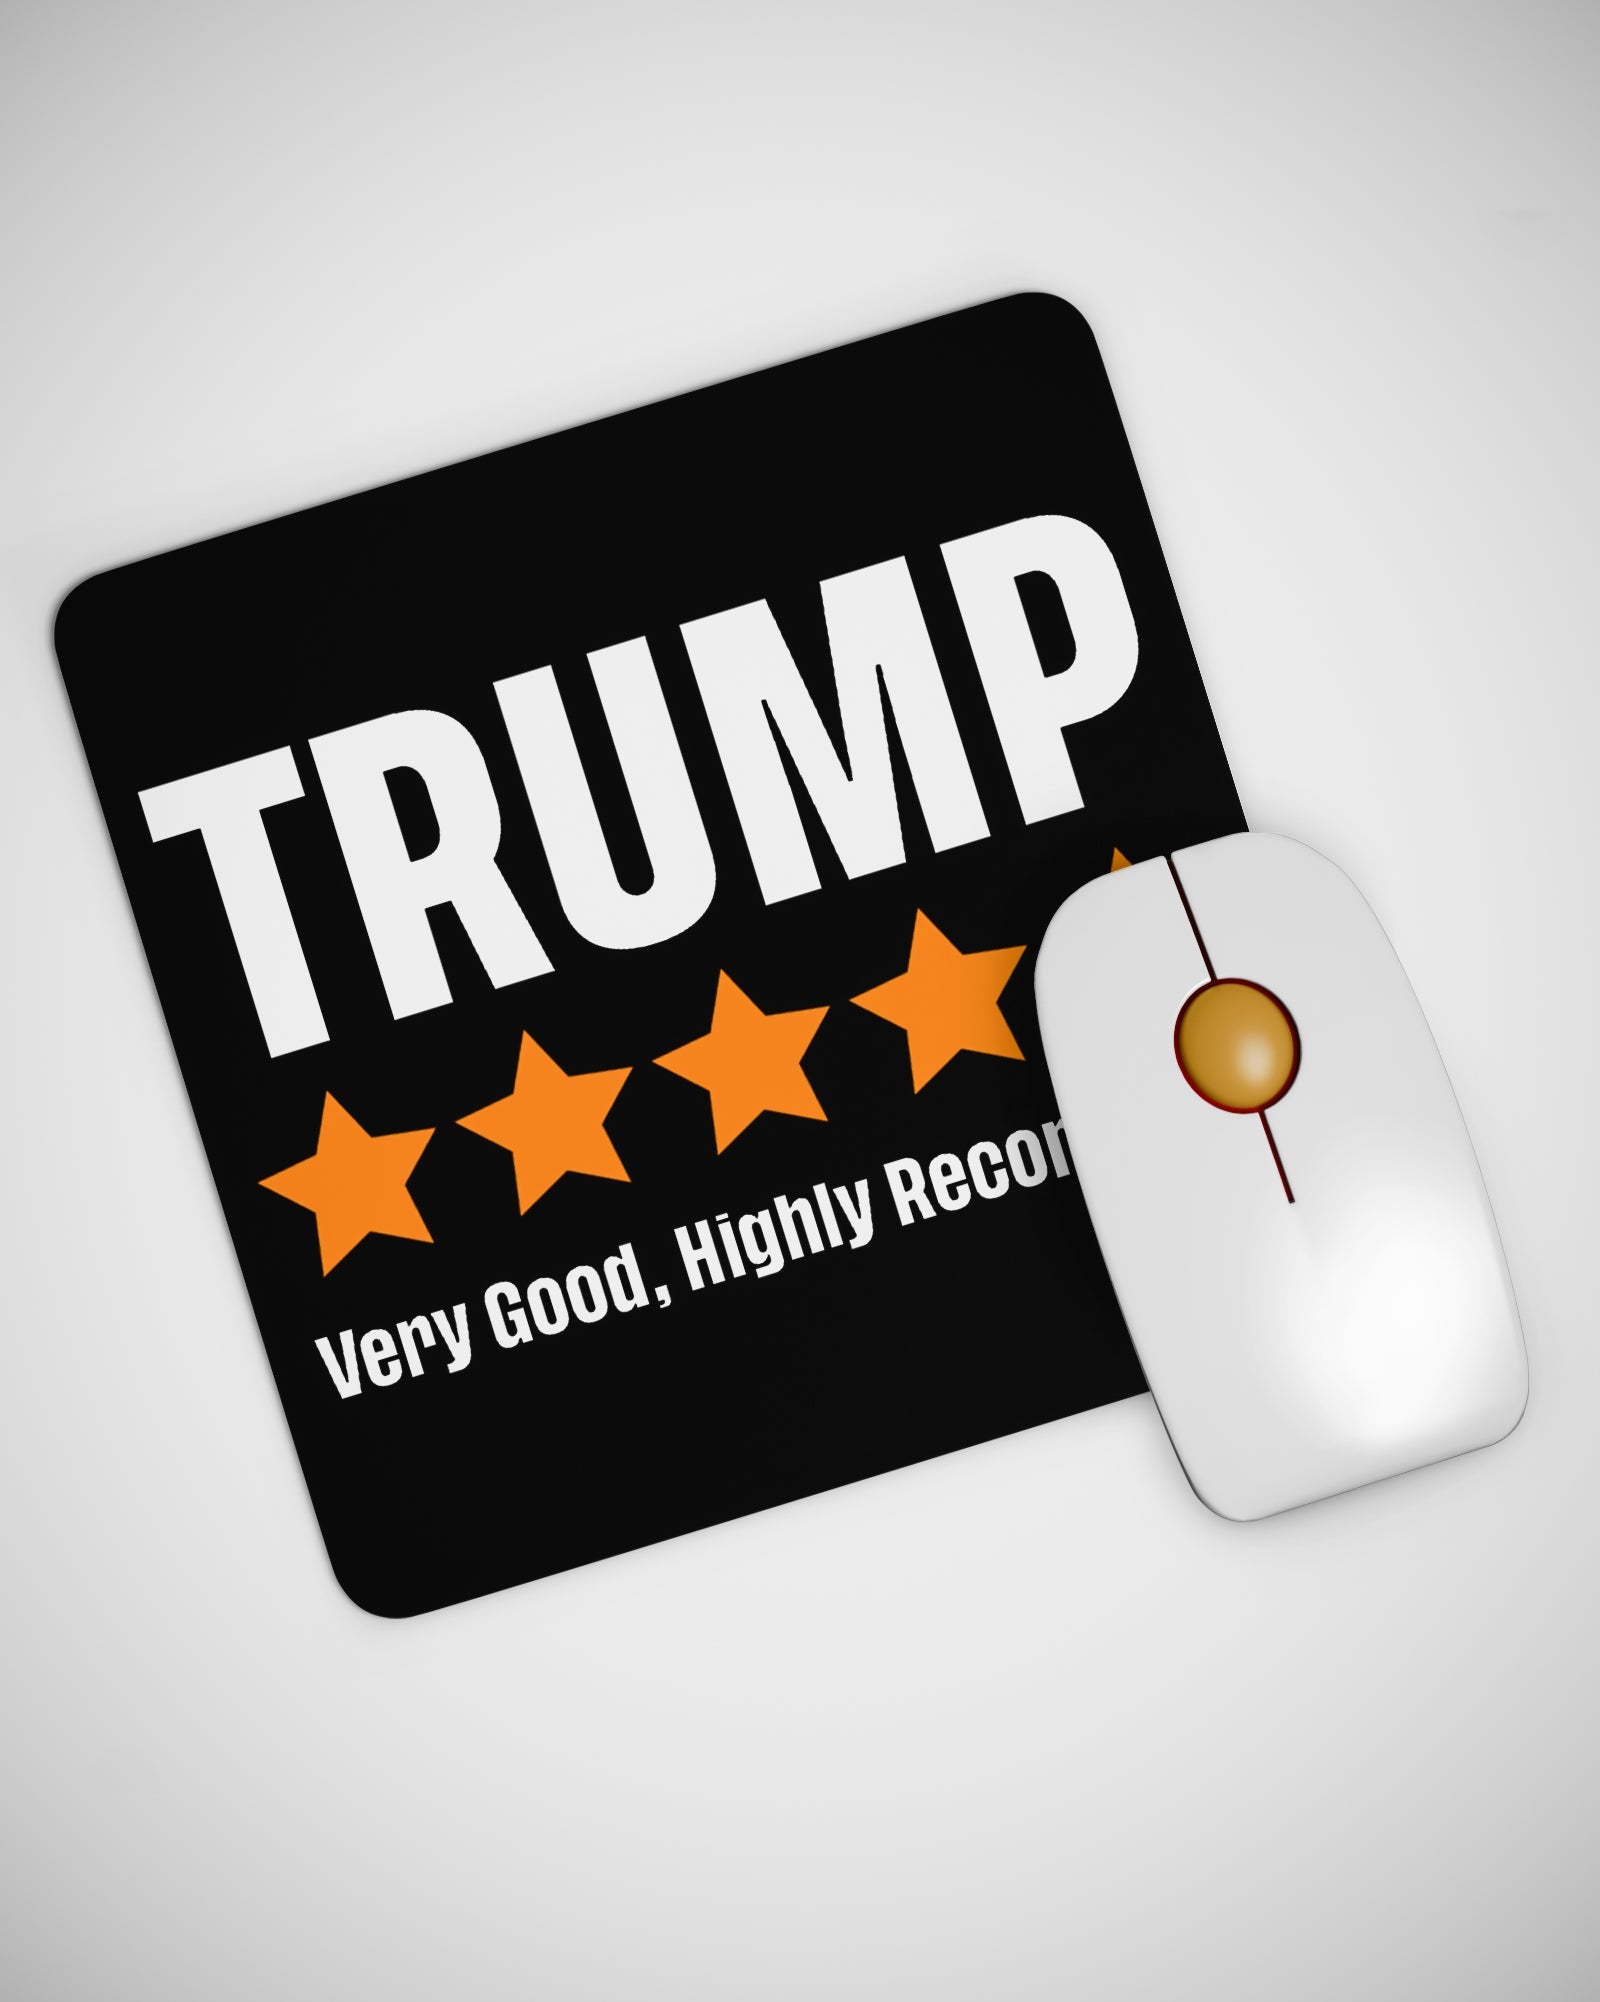 Trump Very Good Highly Recomended Mouse pad